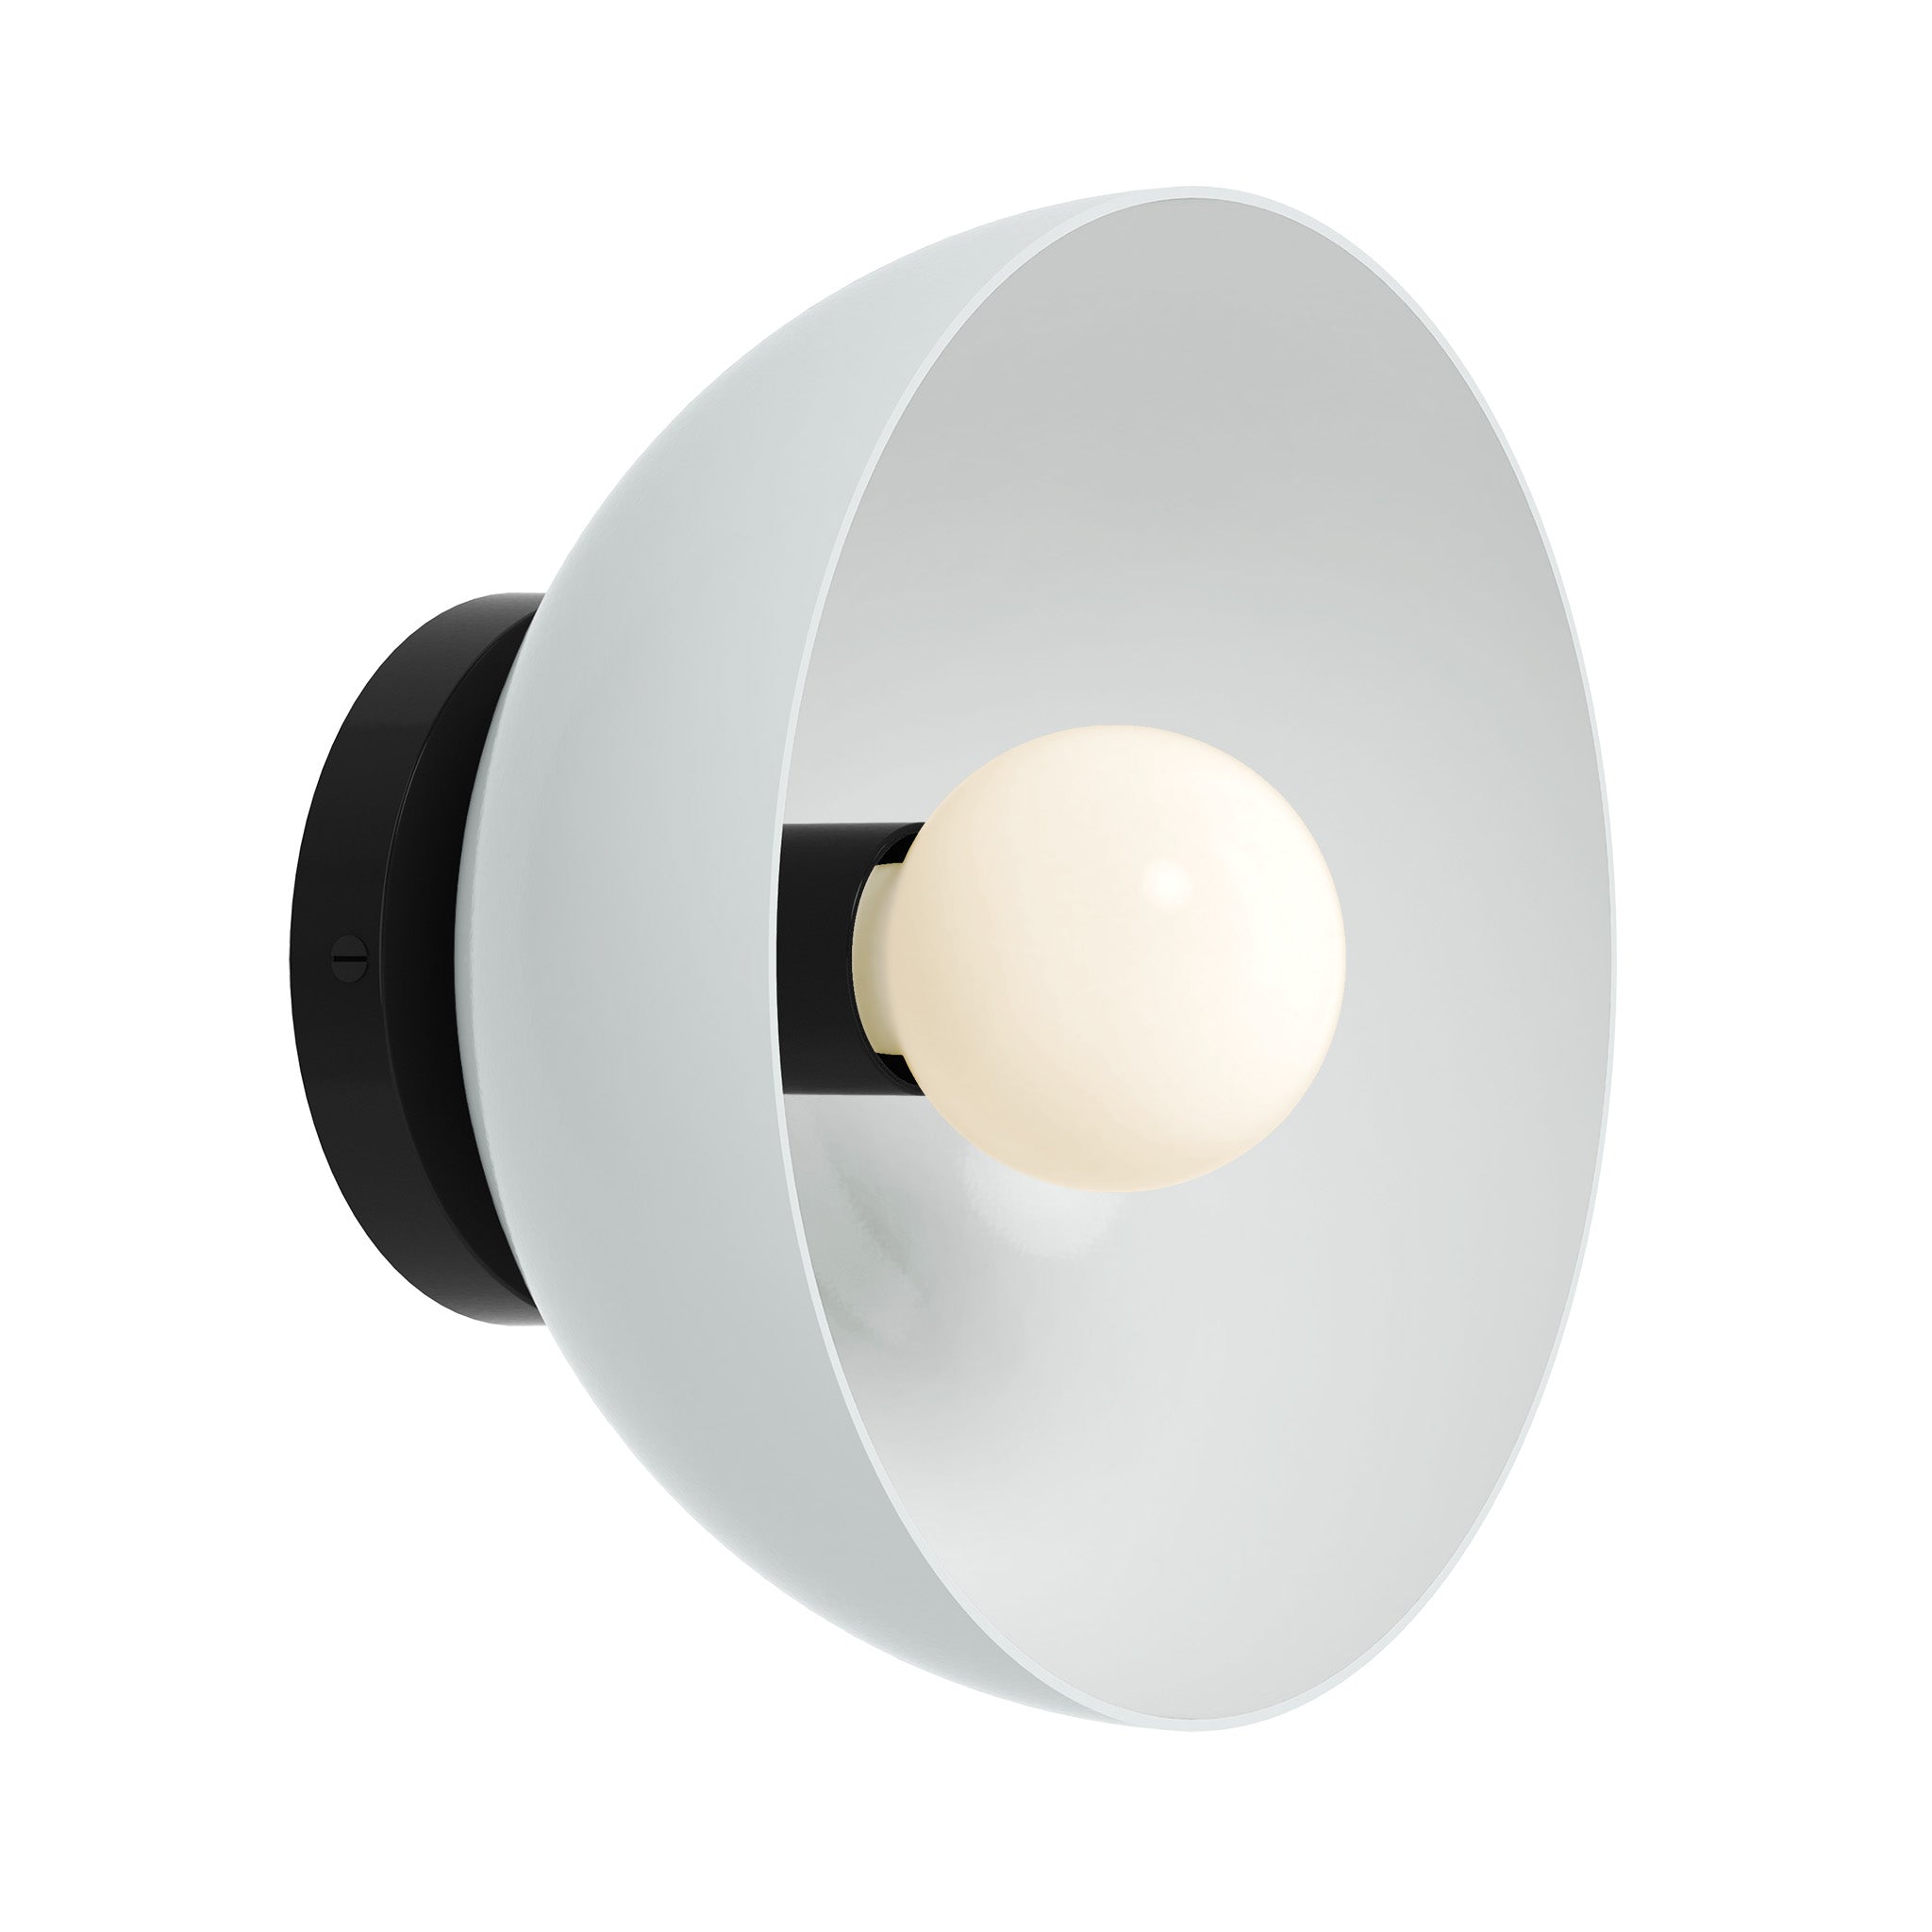 Black and chalk color hemi dome sconce 10" Dutton Brown lighting